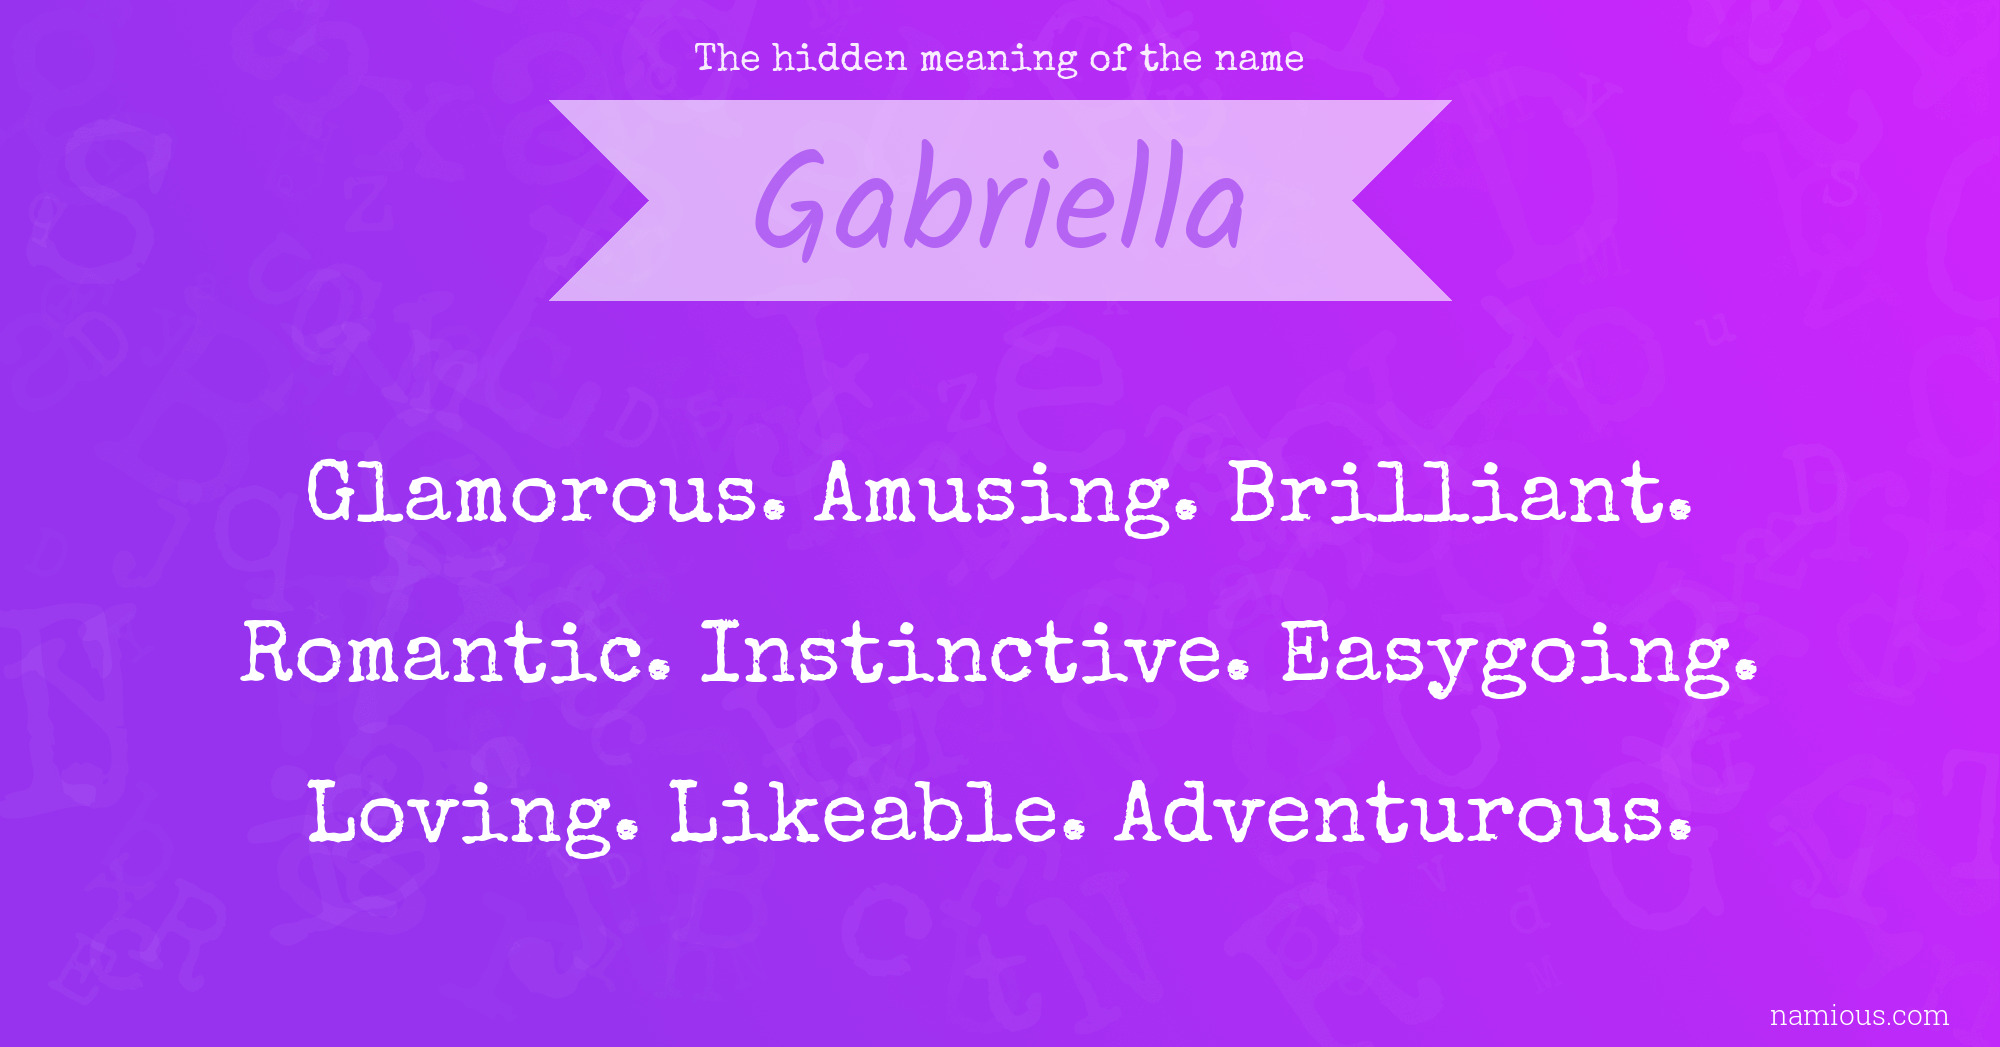 The hidden meaning of the name Gabriella